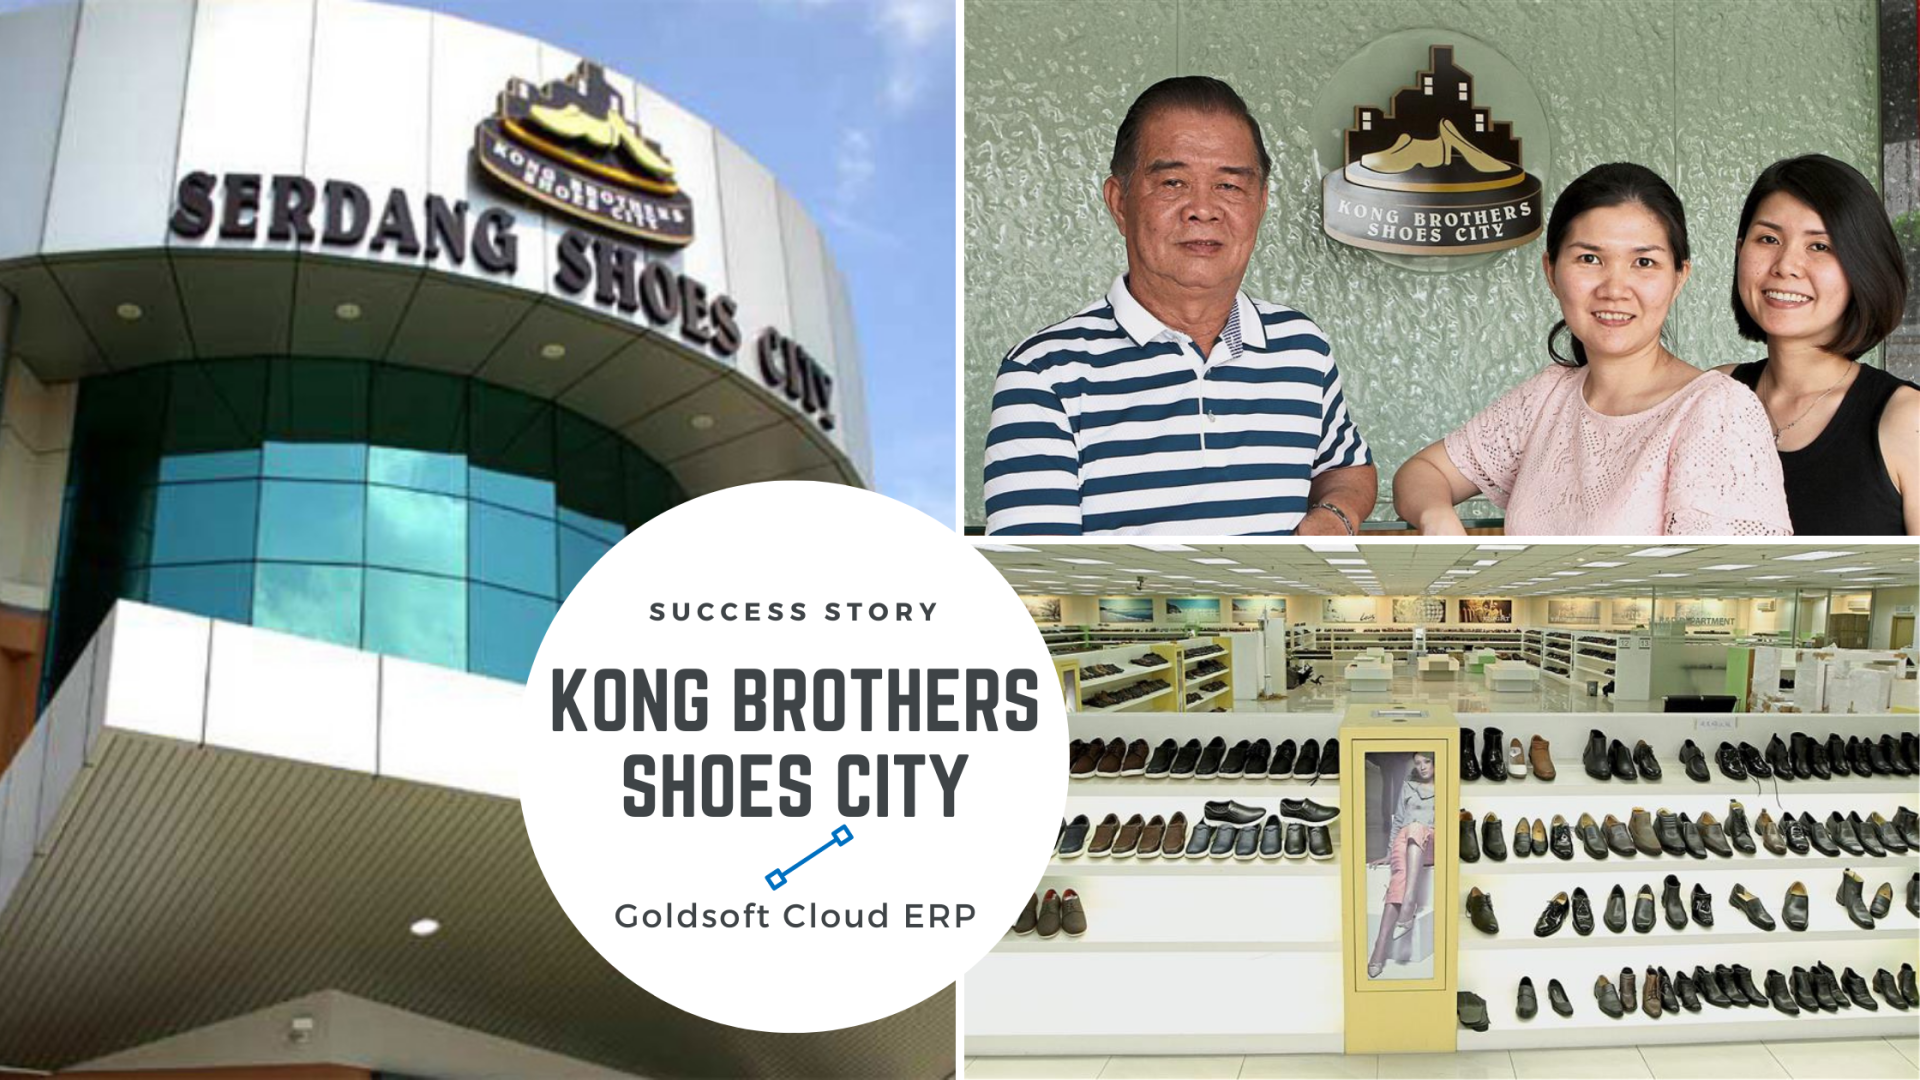 Kong Brothers Shoes City Improves Order and Stock Efficiencies from Digitalization